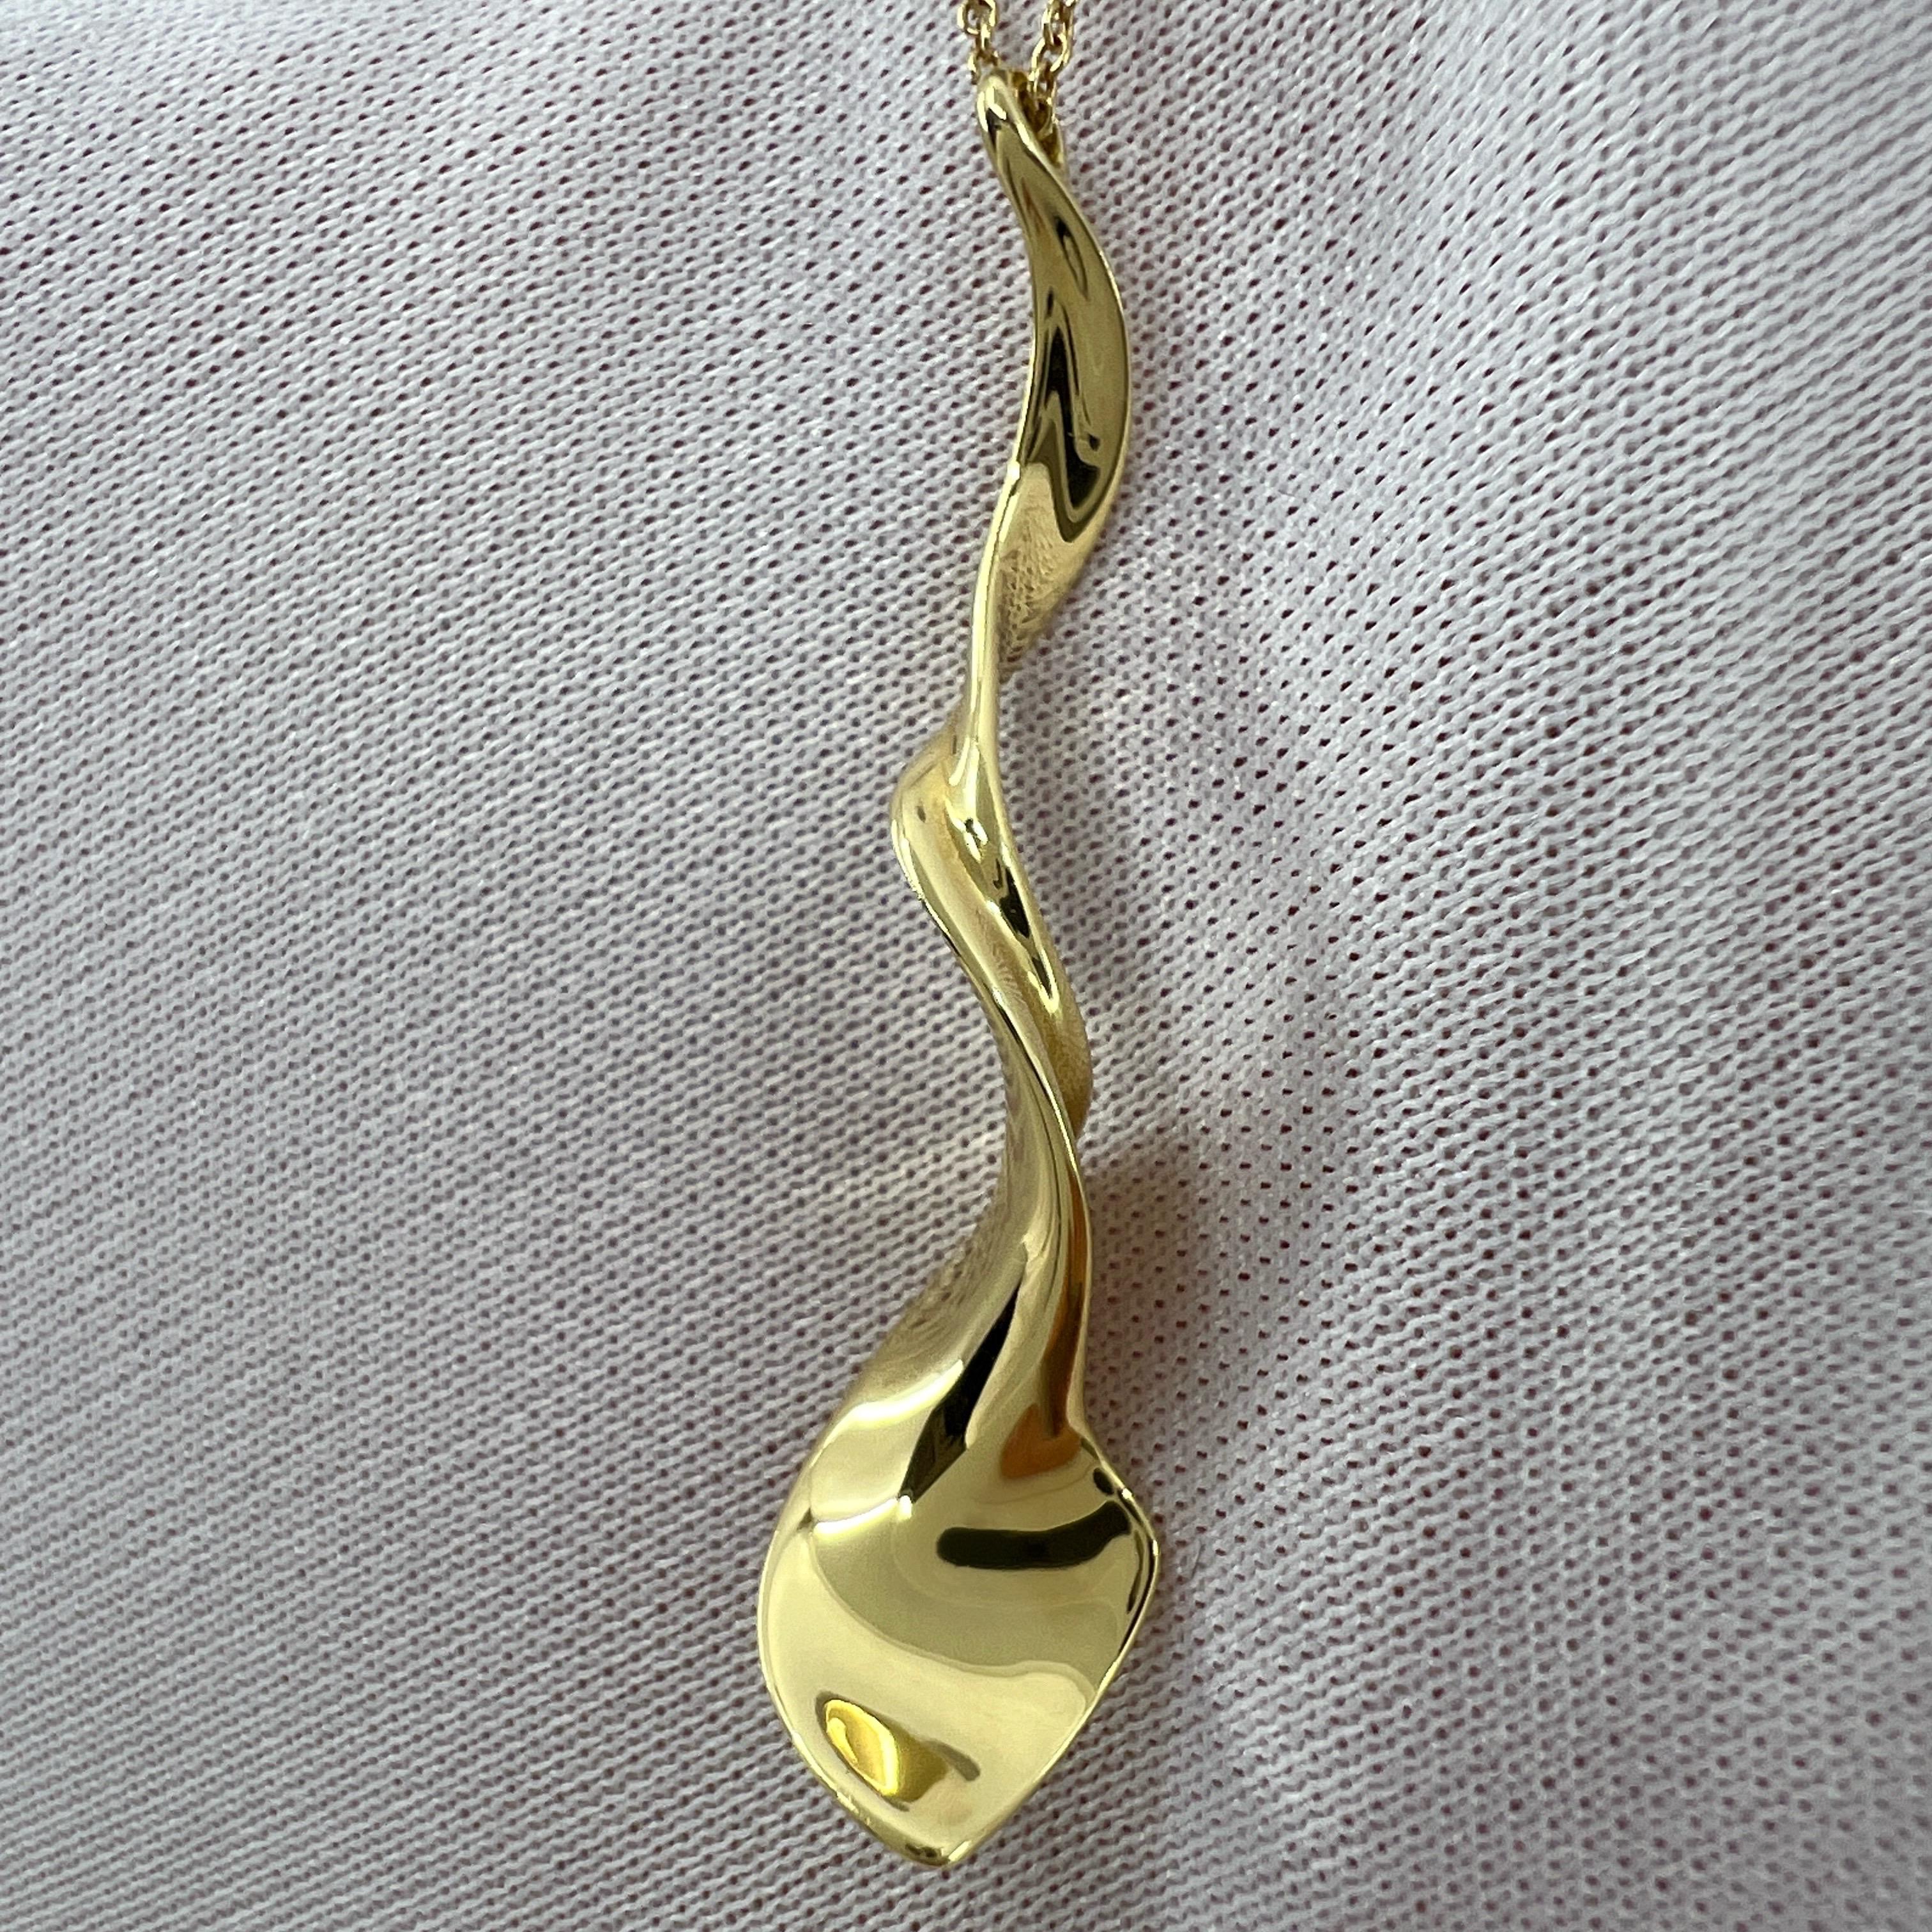 Tiffany & Co Frank Gehry 18k Yellow Gold Orchid Twist Spiral Pendant Necklace For Sale 3